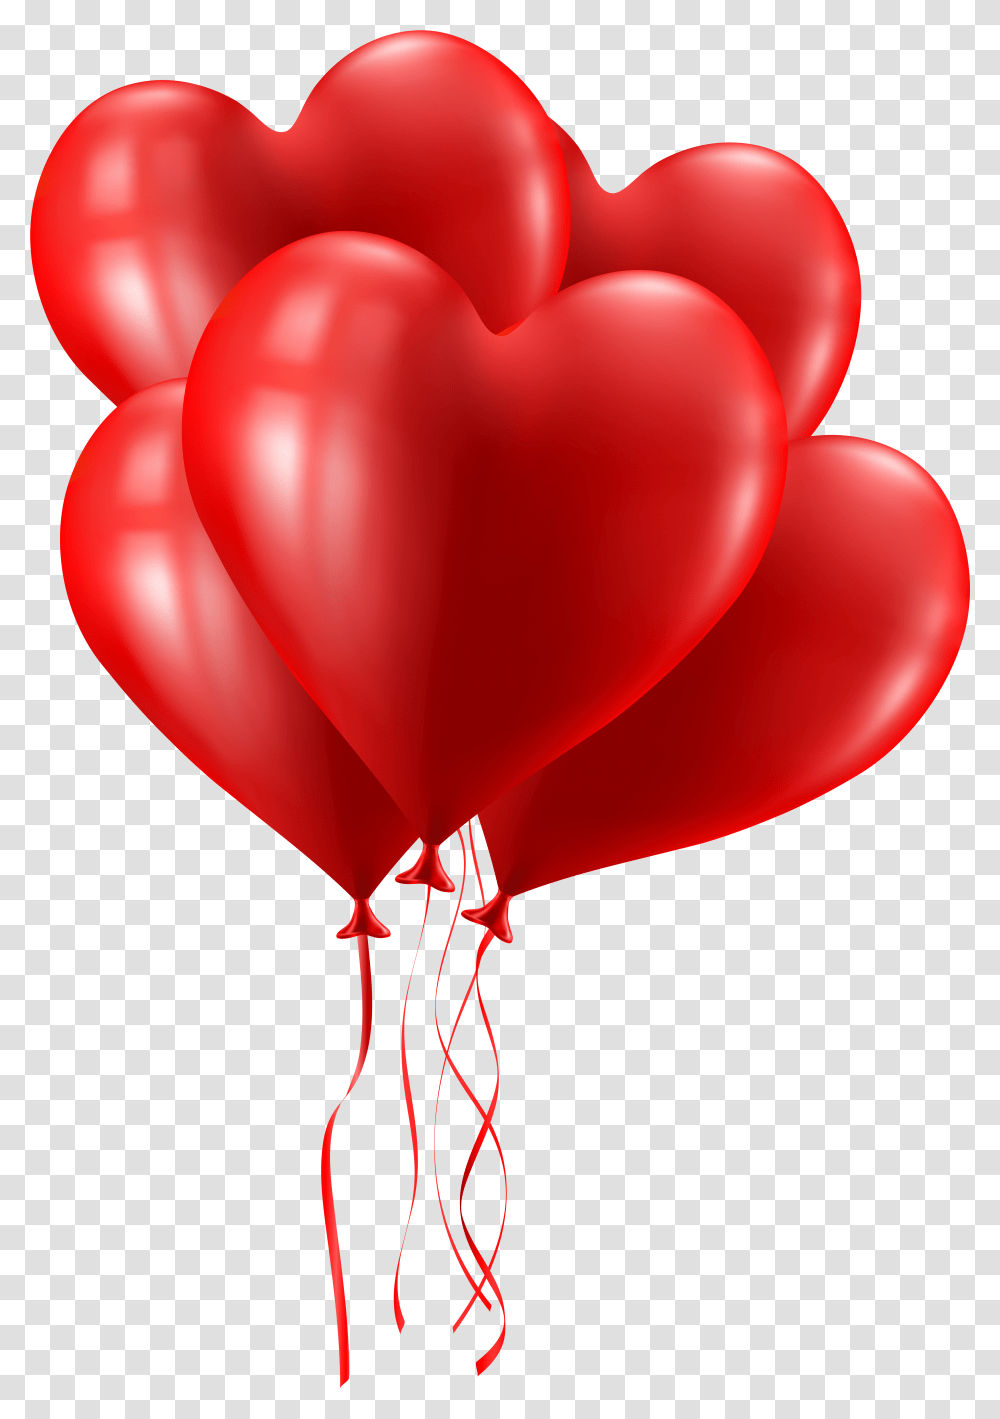 Heart Balloon Pink Balloons Background Transparent Png